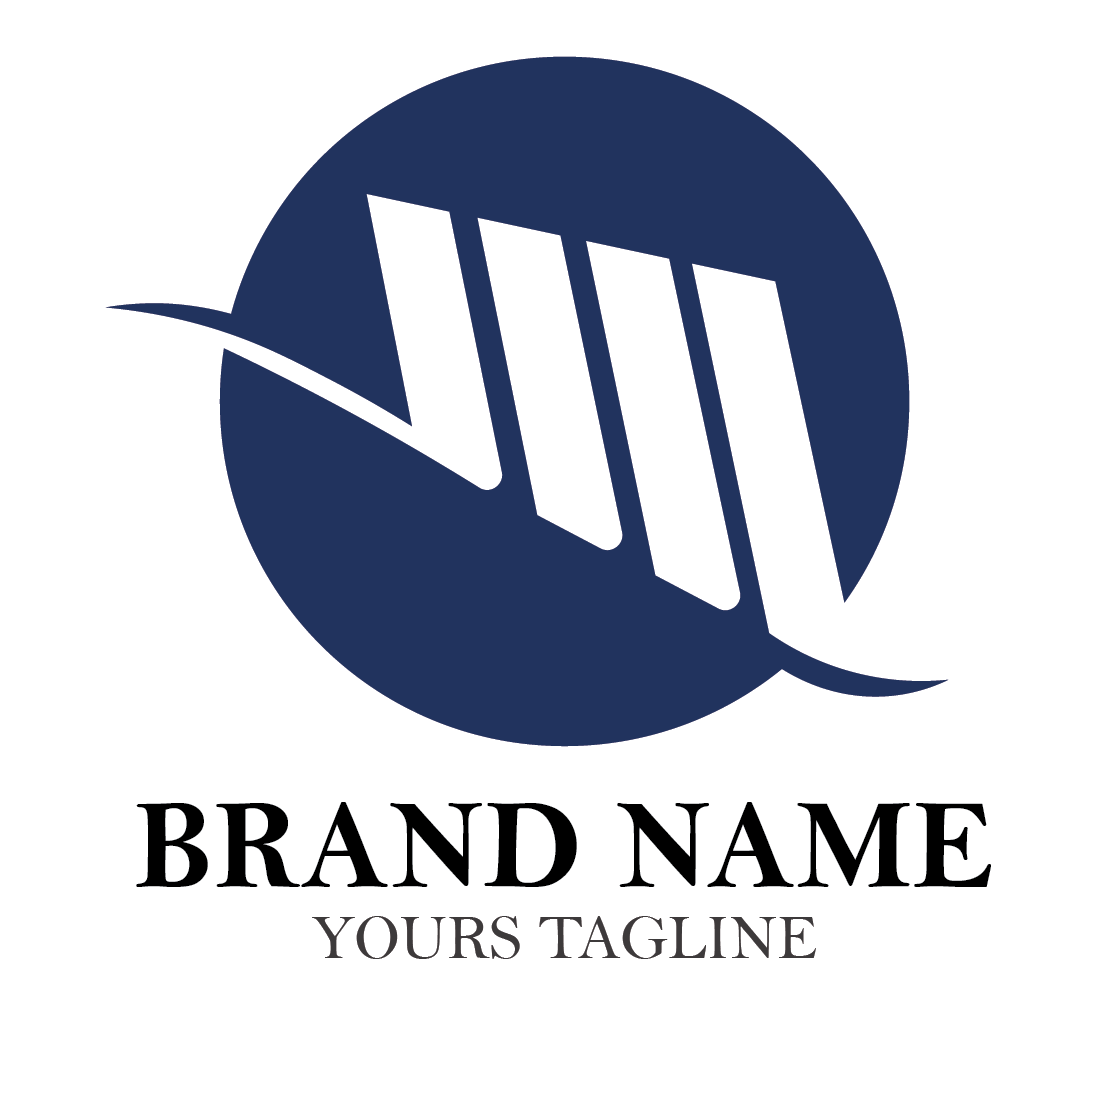 new and unique brand logo design || professional success logo design template for your company, brand and businesses cover image.